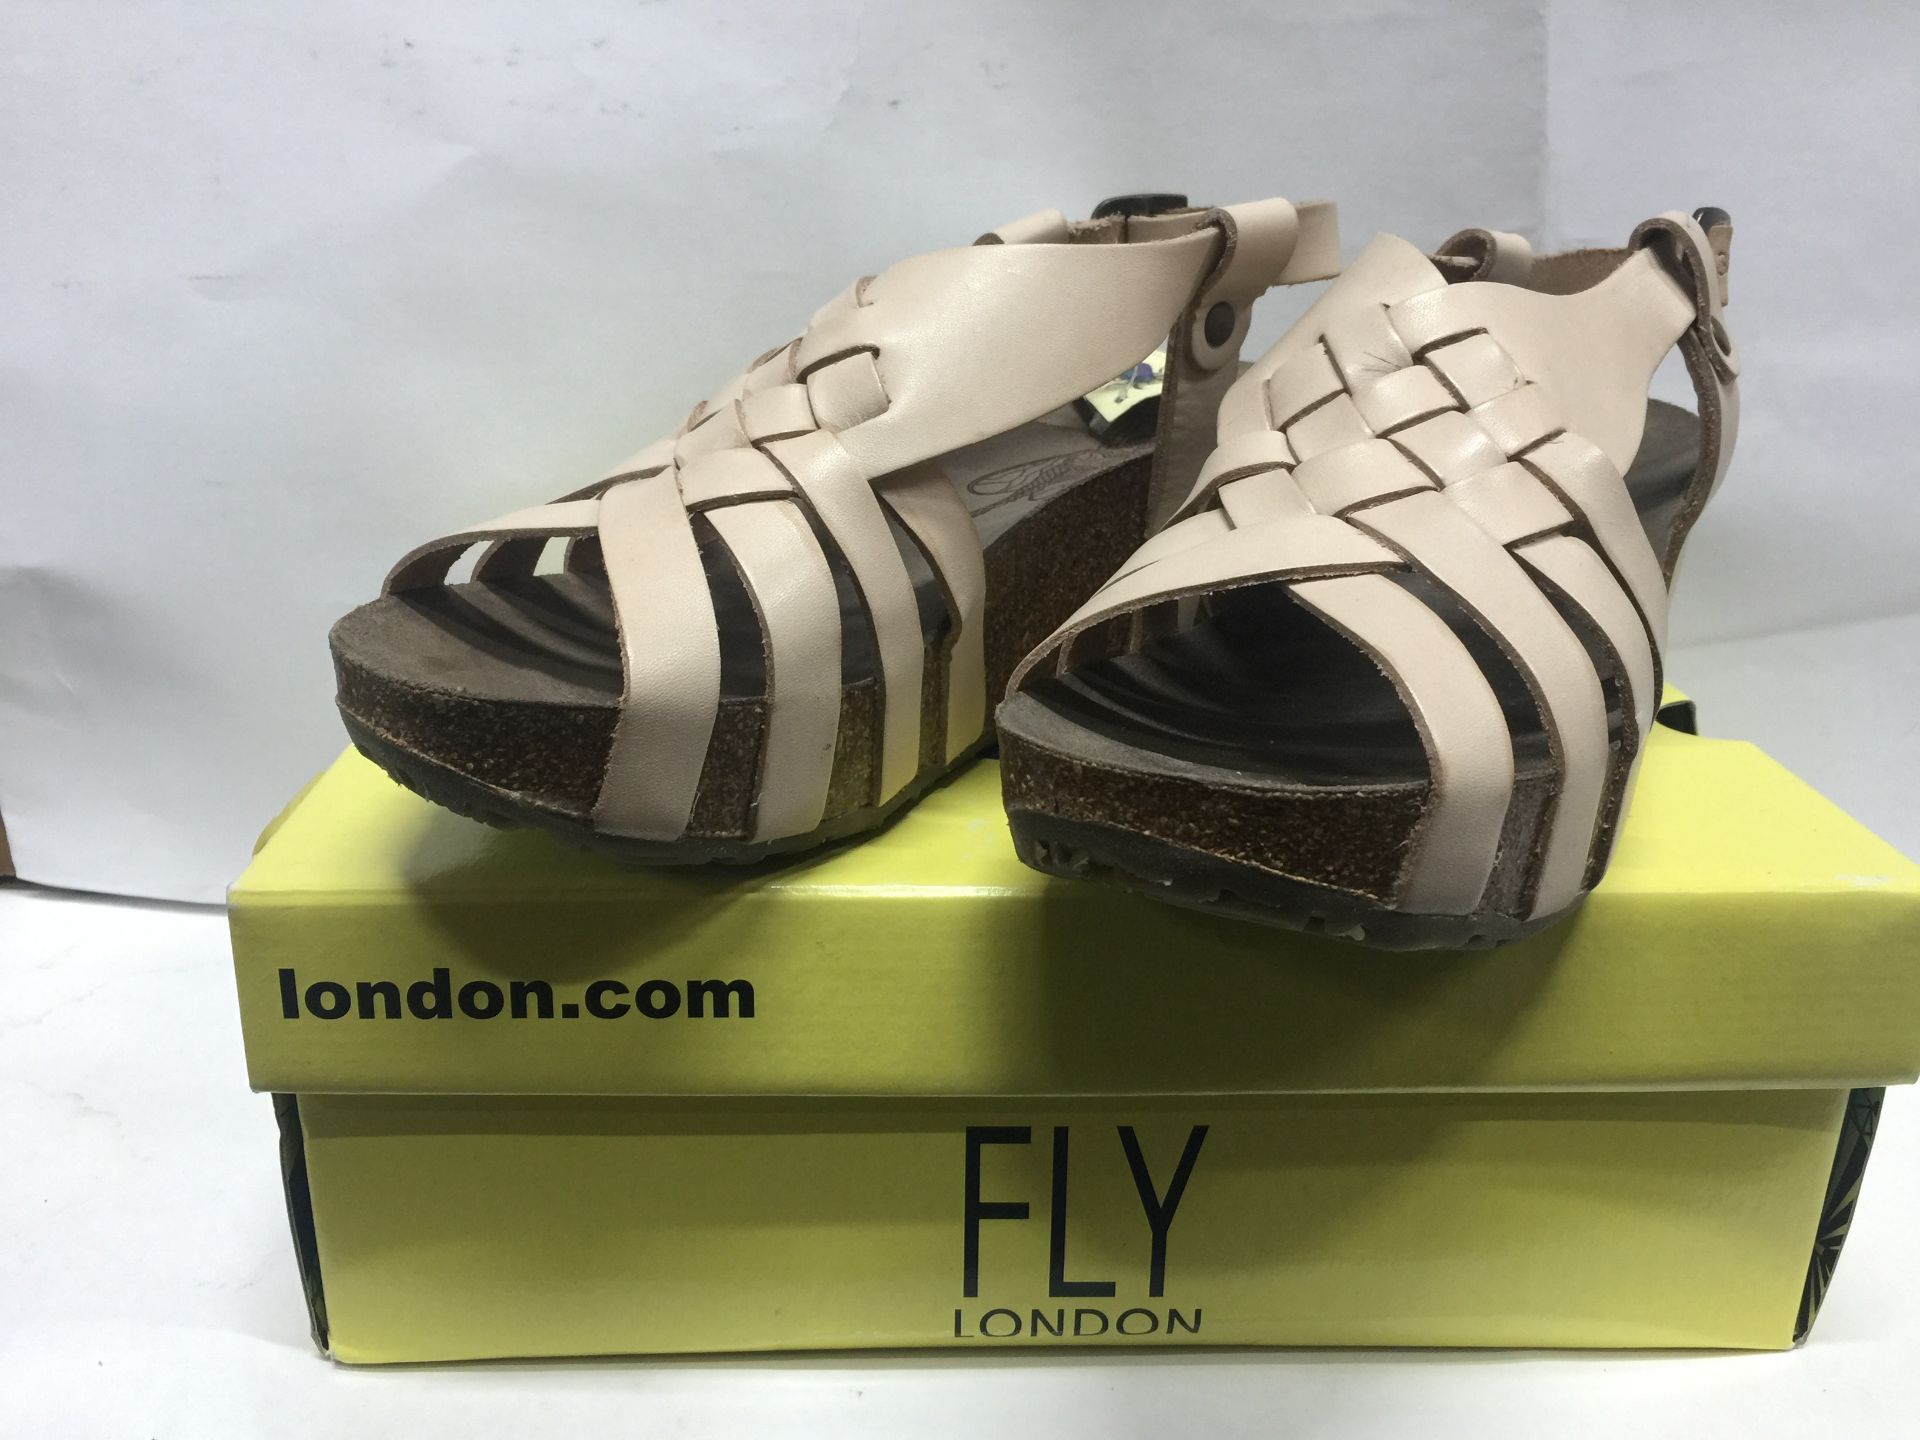 21 x Fly London Women's Sandles Mixed Sizes, Styles and Colours Size Ranging EU 36 - EU 41 - Custome - Image 5 of 6